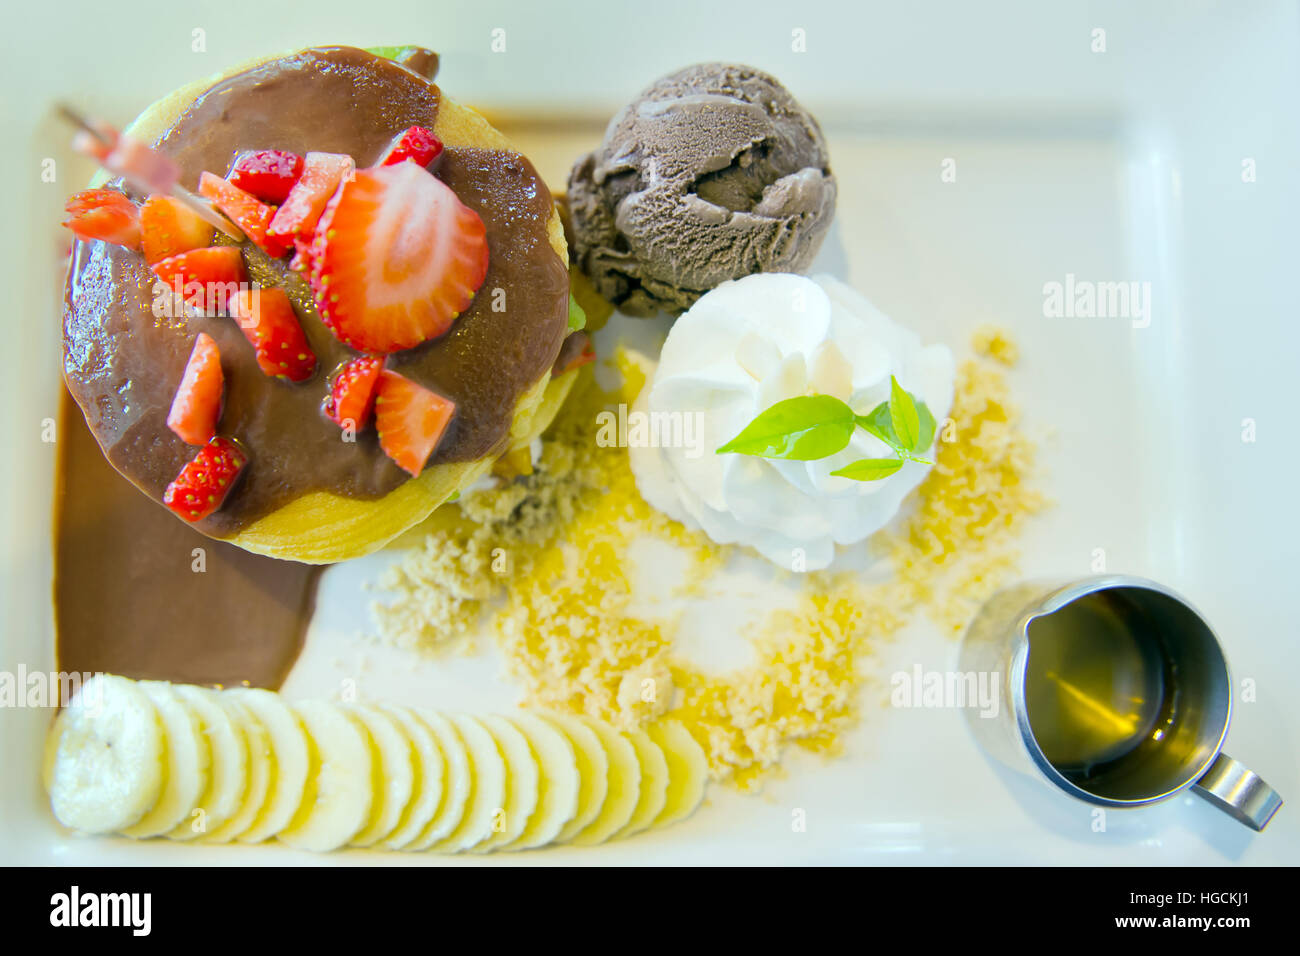 Low fat homemade chocolate ice-cream with strawberry, whip cream served with sliced banana, chocolate filled crepe and natural honey, a perfect sweet Stock Photo